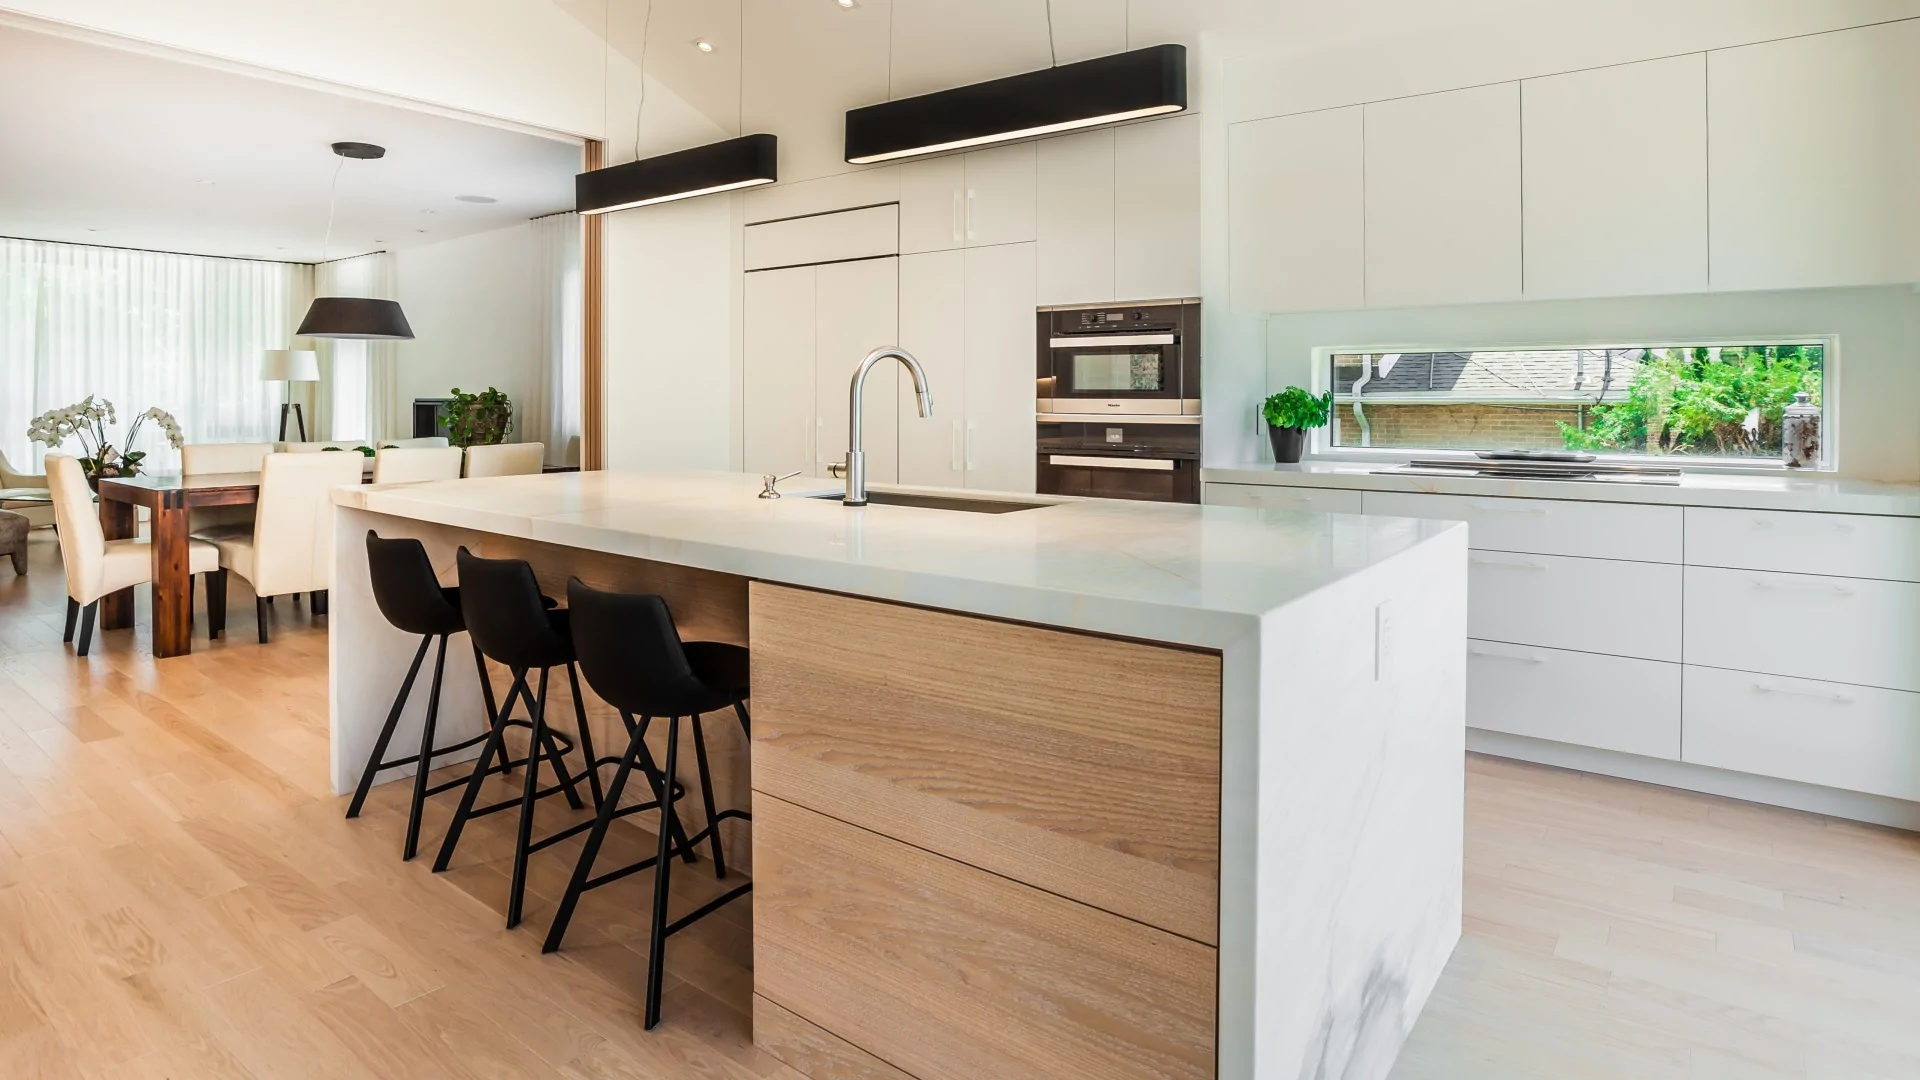 Why are kitchen cabinets considerations important?